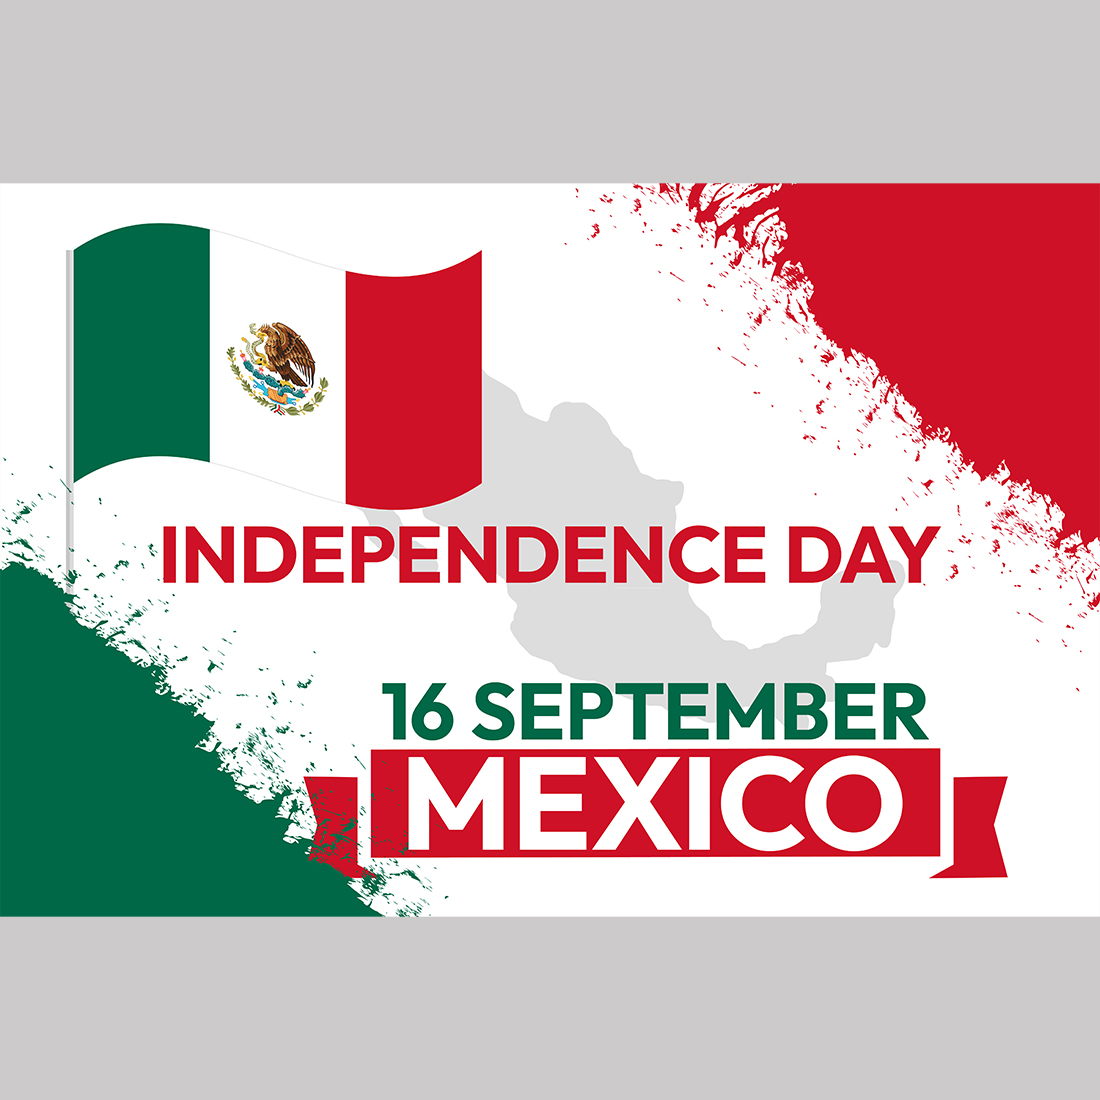 Mexico independence day preview image.